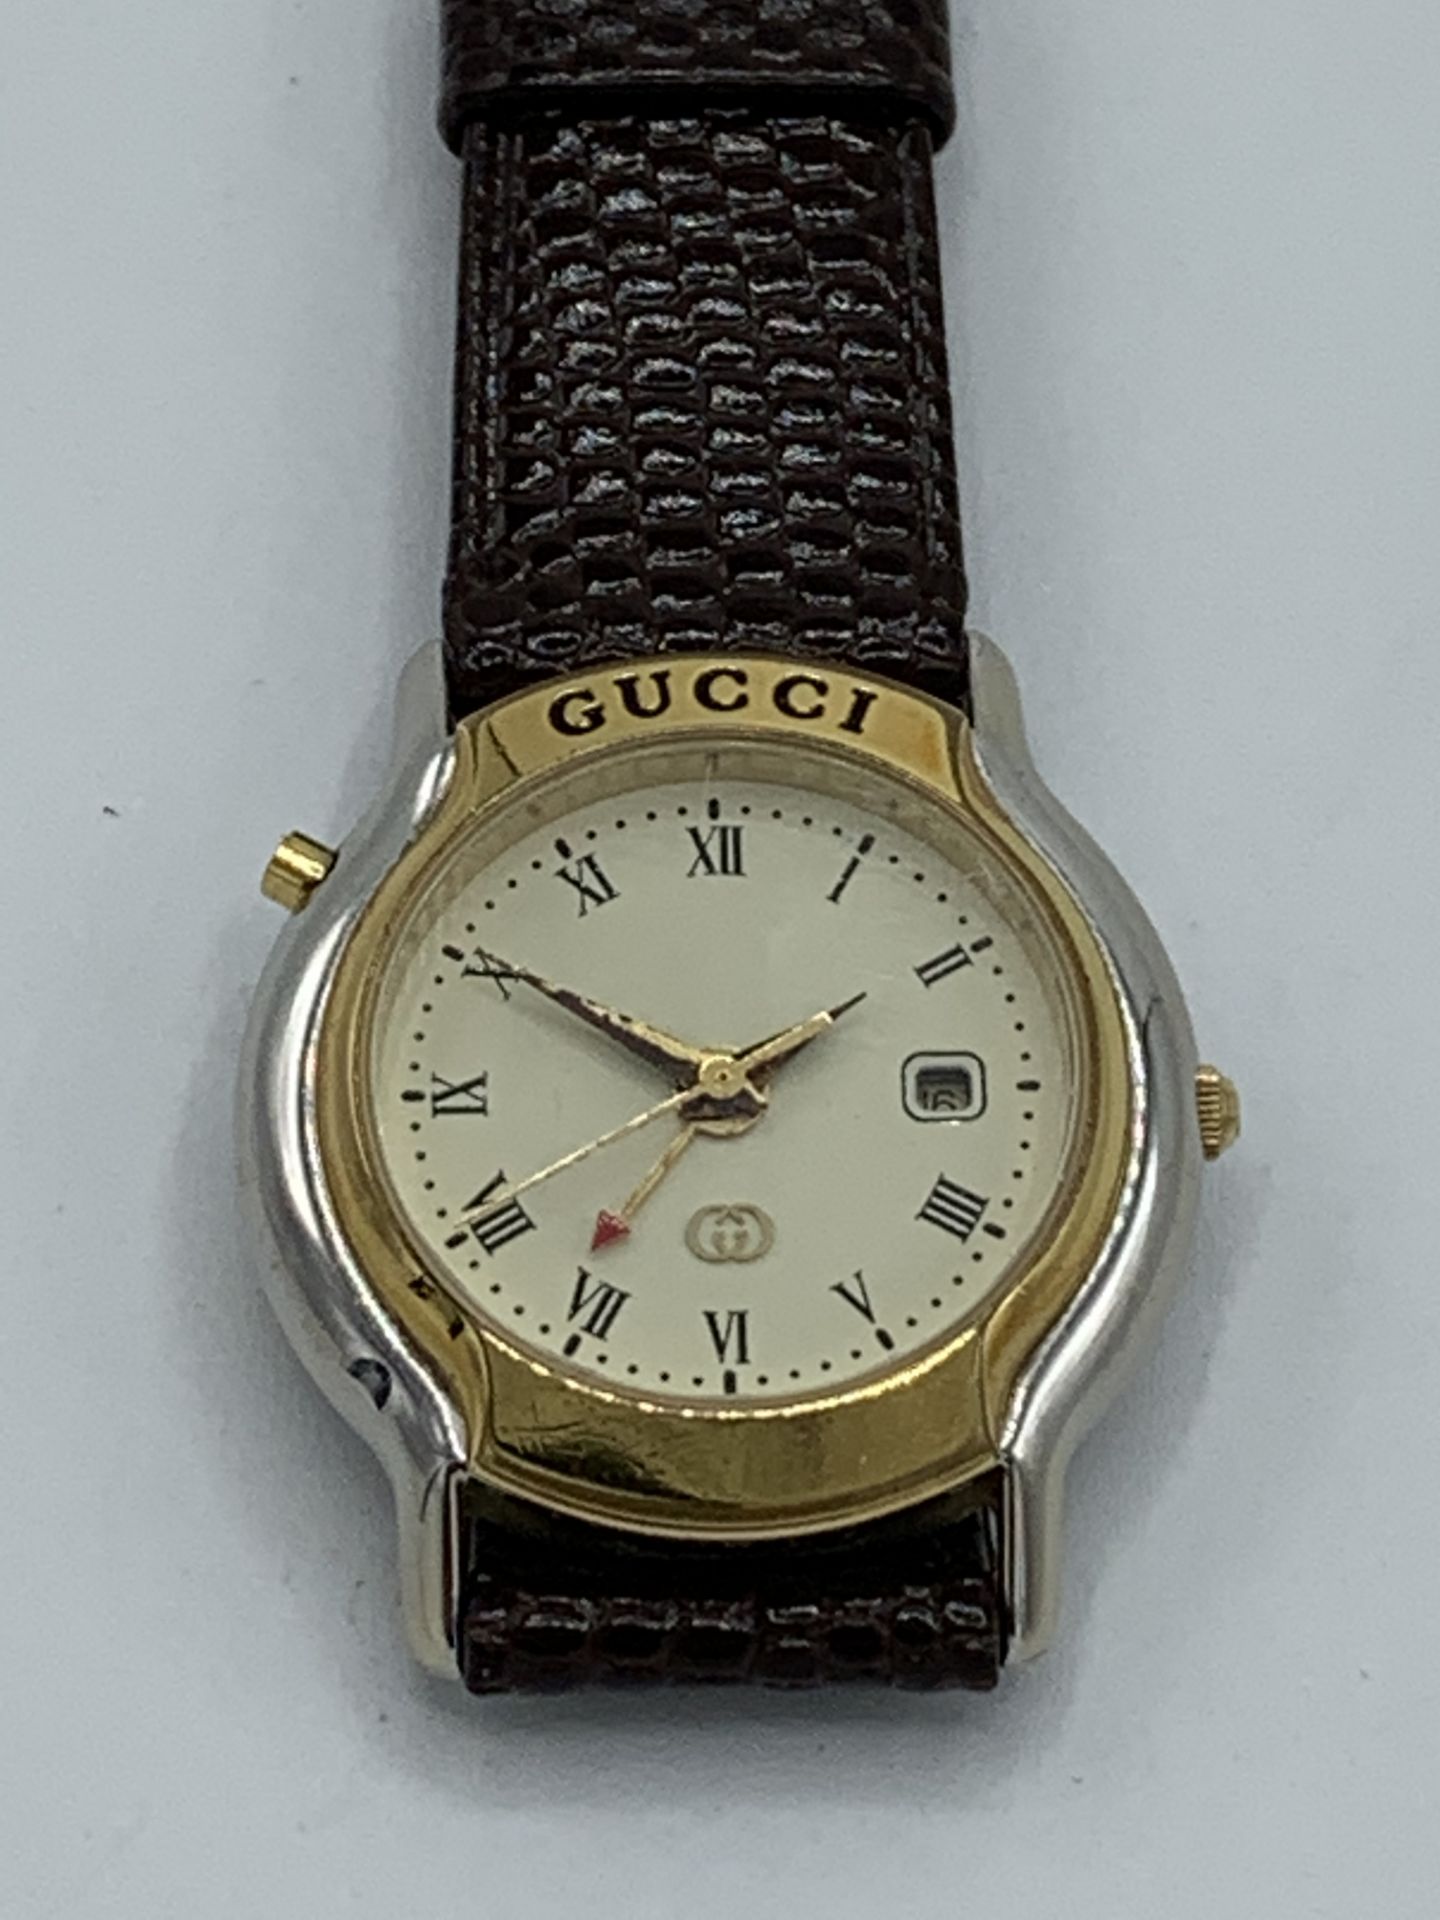 Lady's Gucci Mondiale gold tone stainless steel quartz wrist watch on a brown leather strap, Ref No: - Image 2 of 3